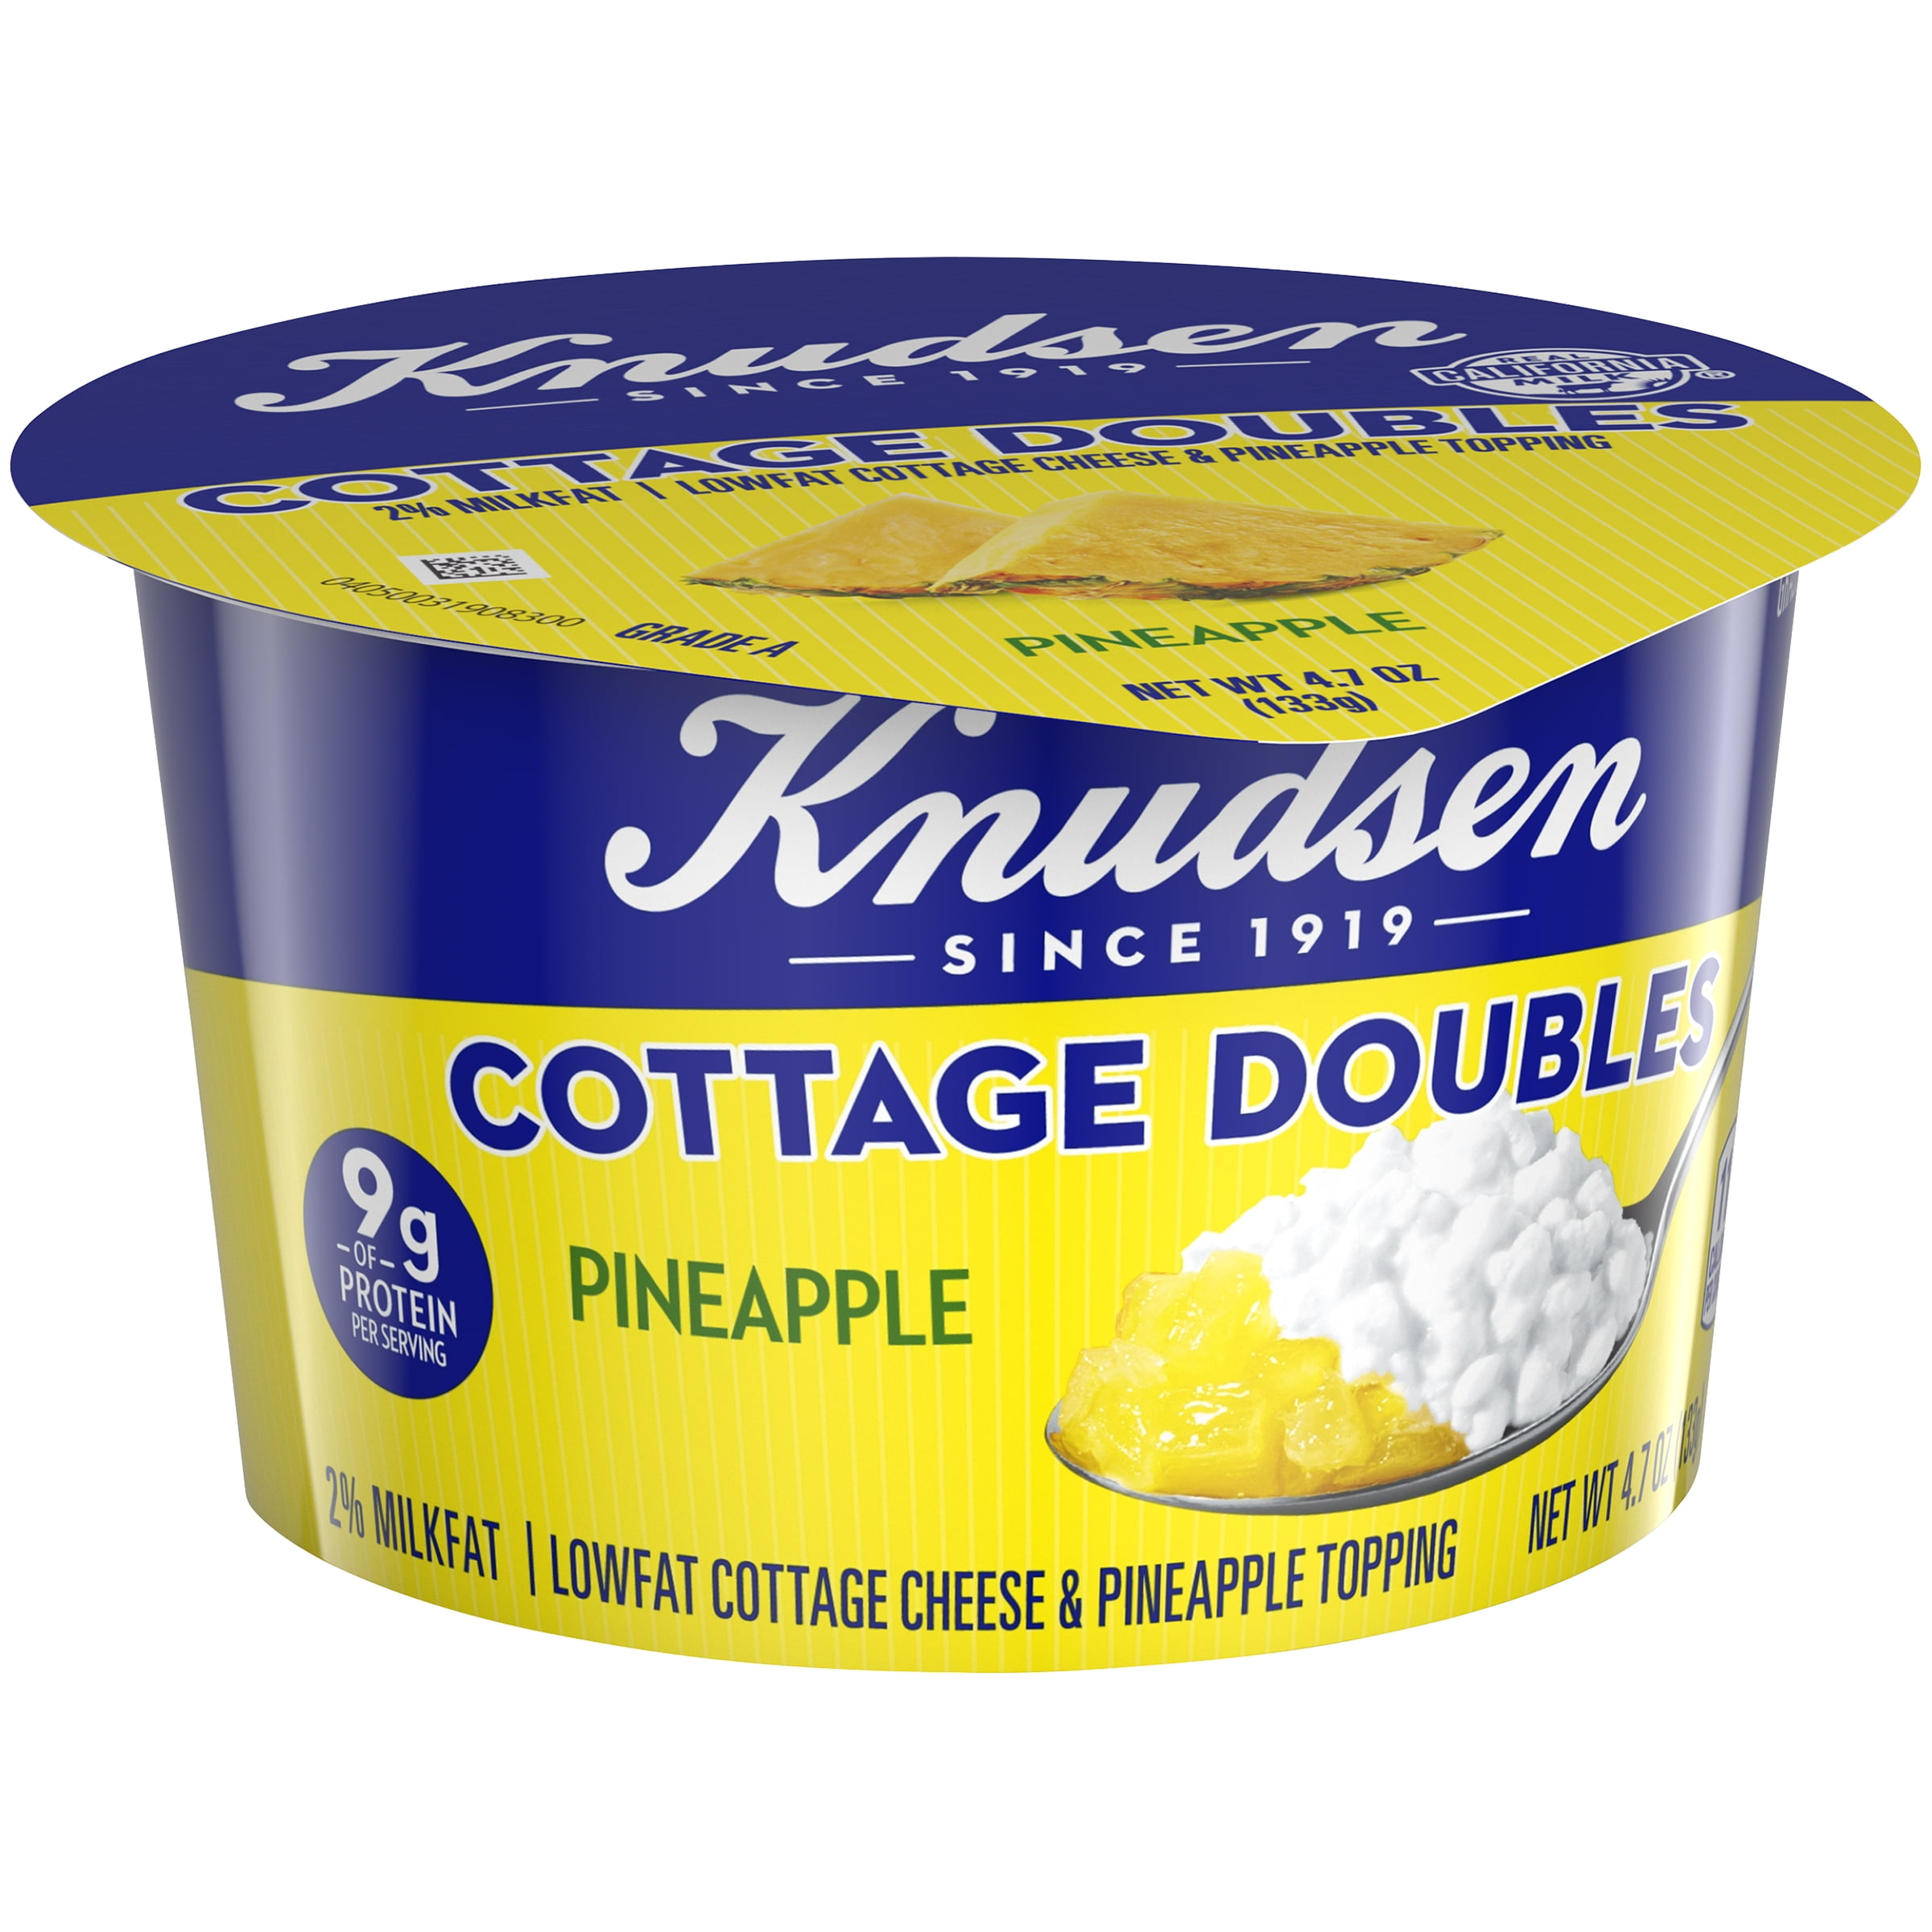 Knudsen Low Fat 2 Milkfat Cottage Cheese Doubles With Pineapple